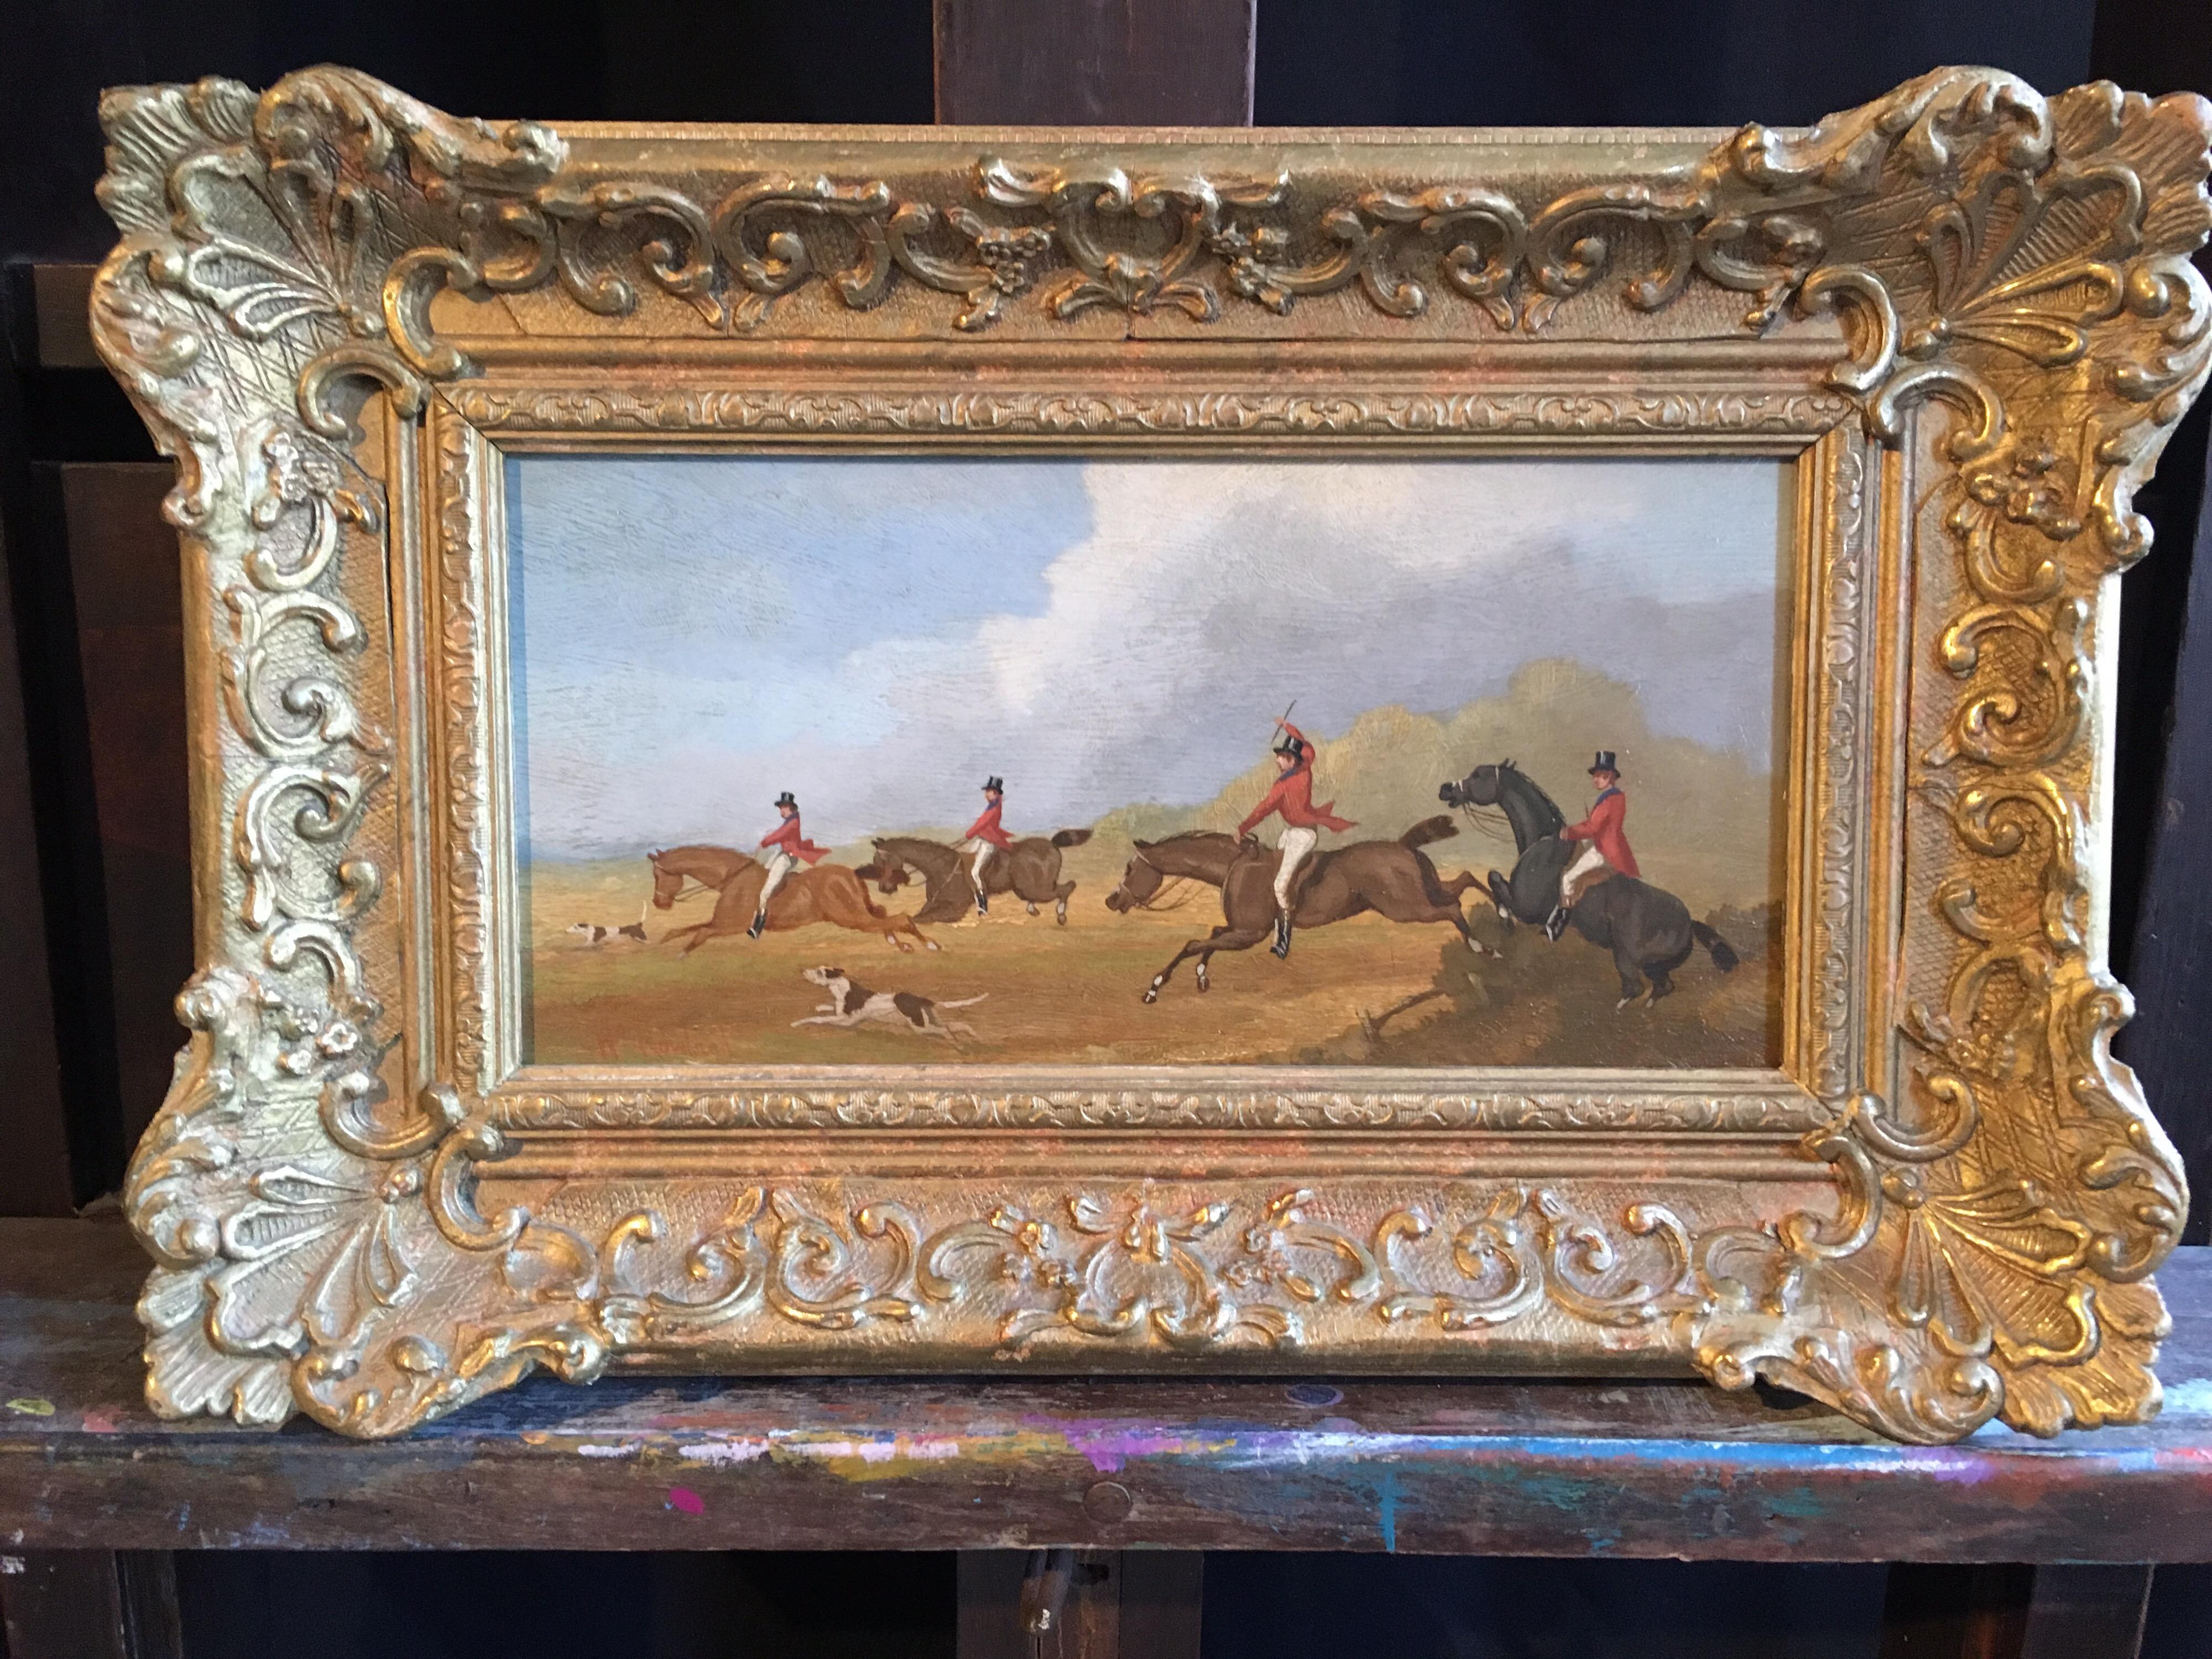 The Hunt
By artist William Rowland, British 19th century
Signed by the artist on the lower left hand corner
Oil painting on board, framed
Framed size: 11 x 17 inches
provenance: private UK collection

Fabulous scene of a spirited fox hunt, taking